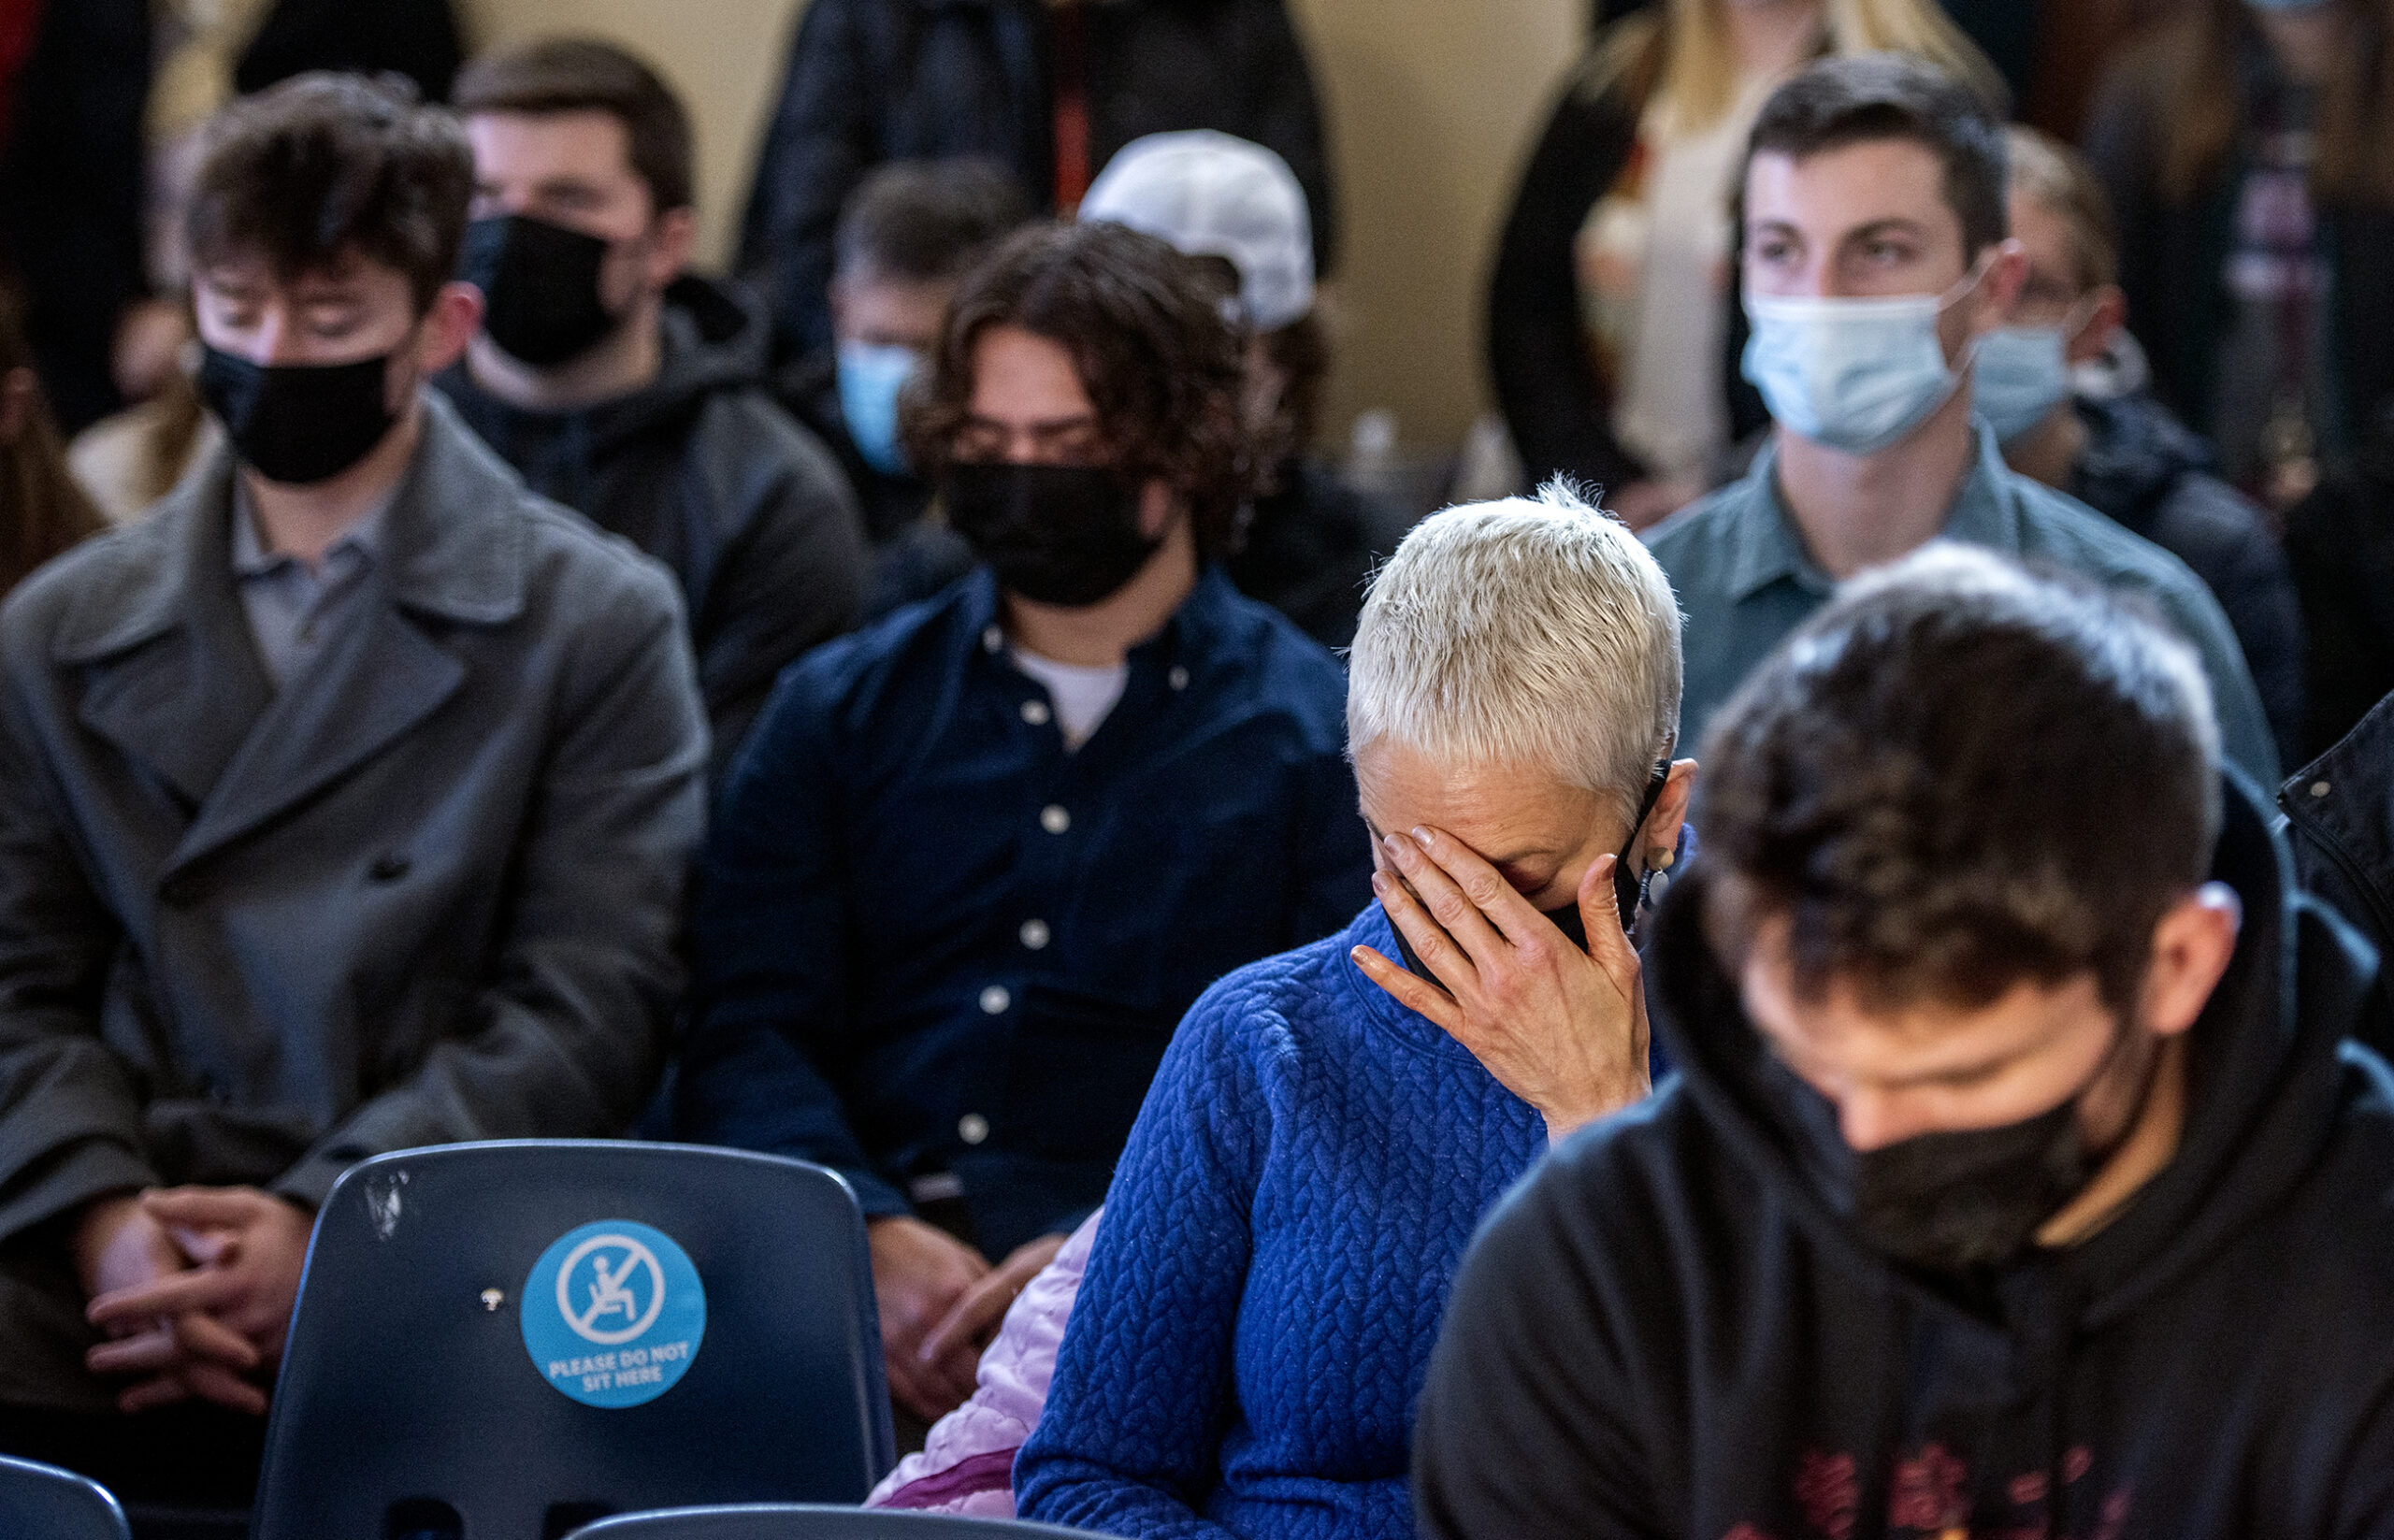 A woman a blue top covers her face with her hand as she prays with other attendees.